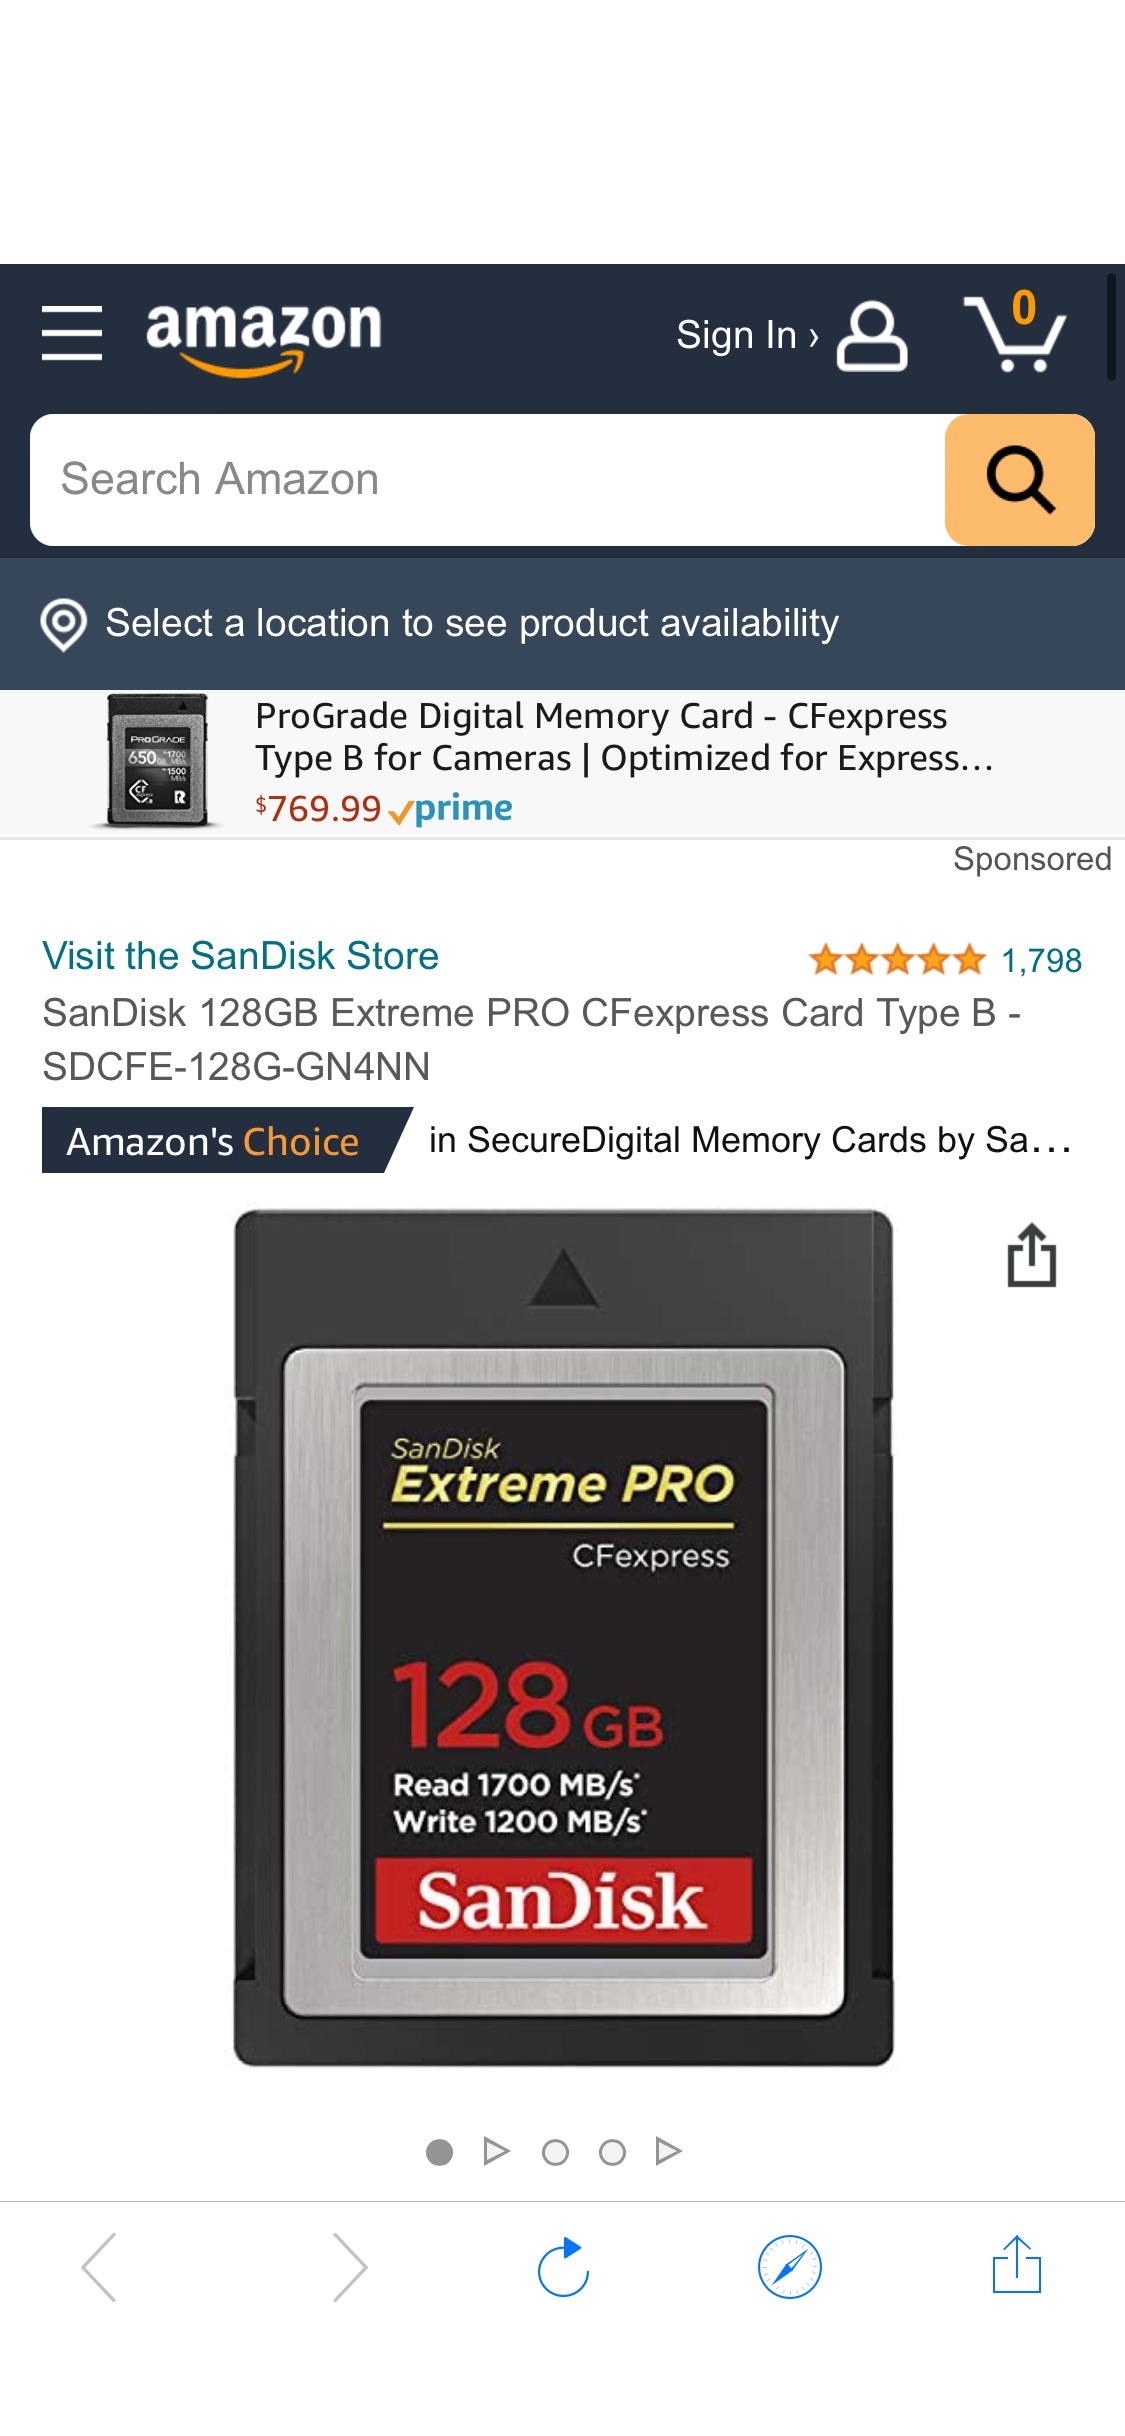 Amazon.com: SanDisk 128GB Extreme PRO CFexpress Card Type B - SDCFE-128G-GN4NN : Everything Else